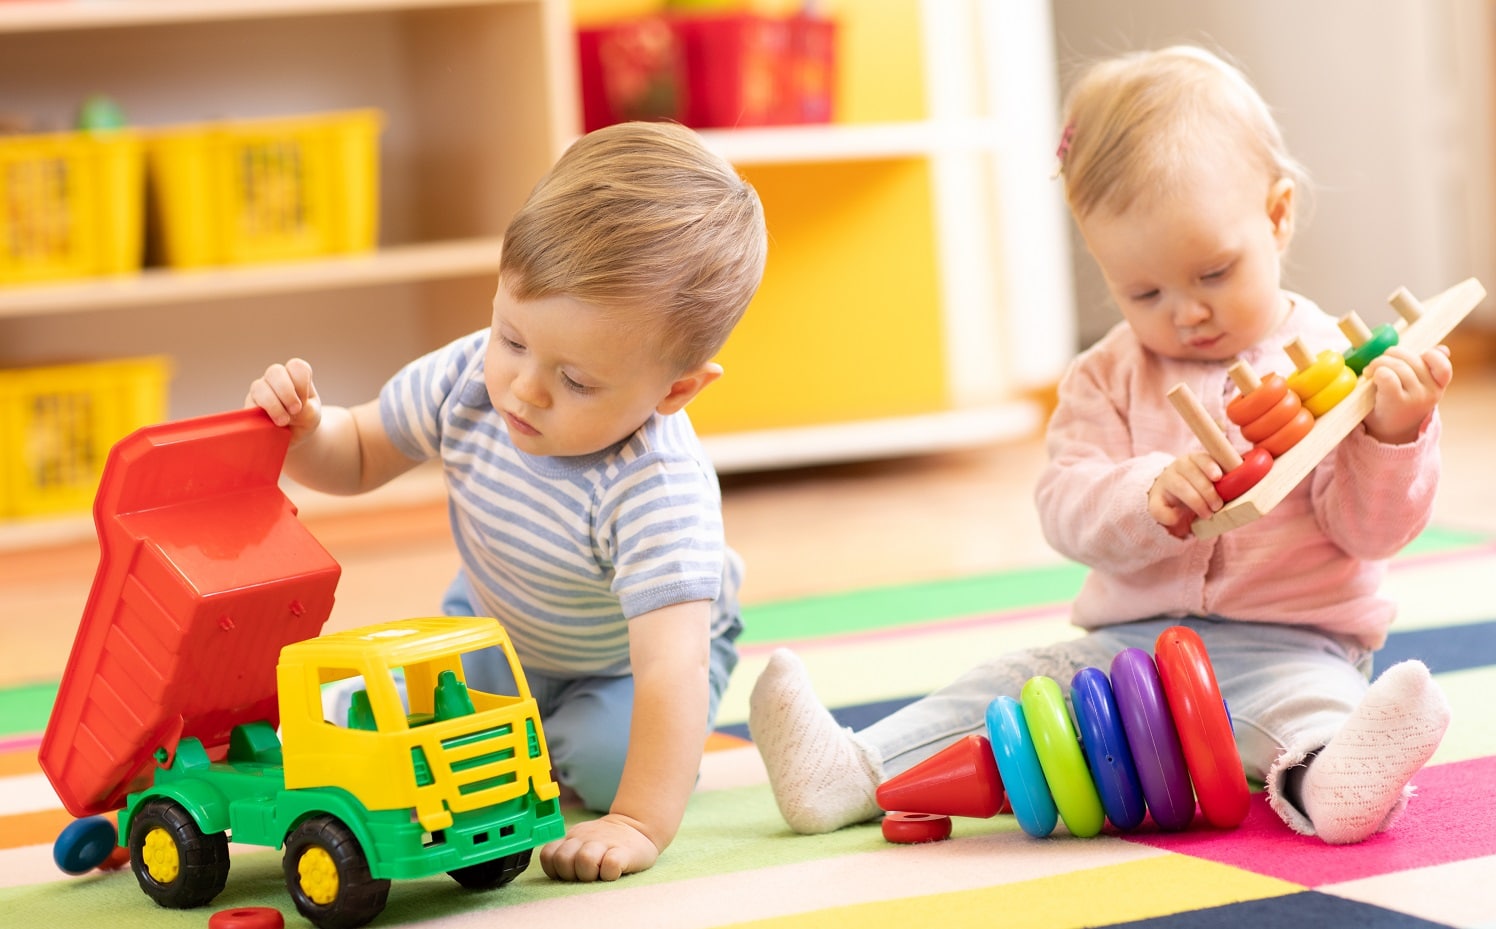 find some games and learning activities for your baby - What Age Do Kids Learn to Read?